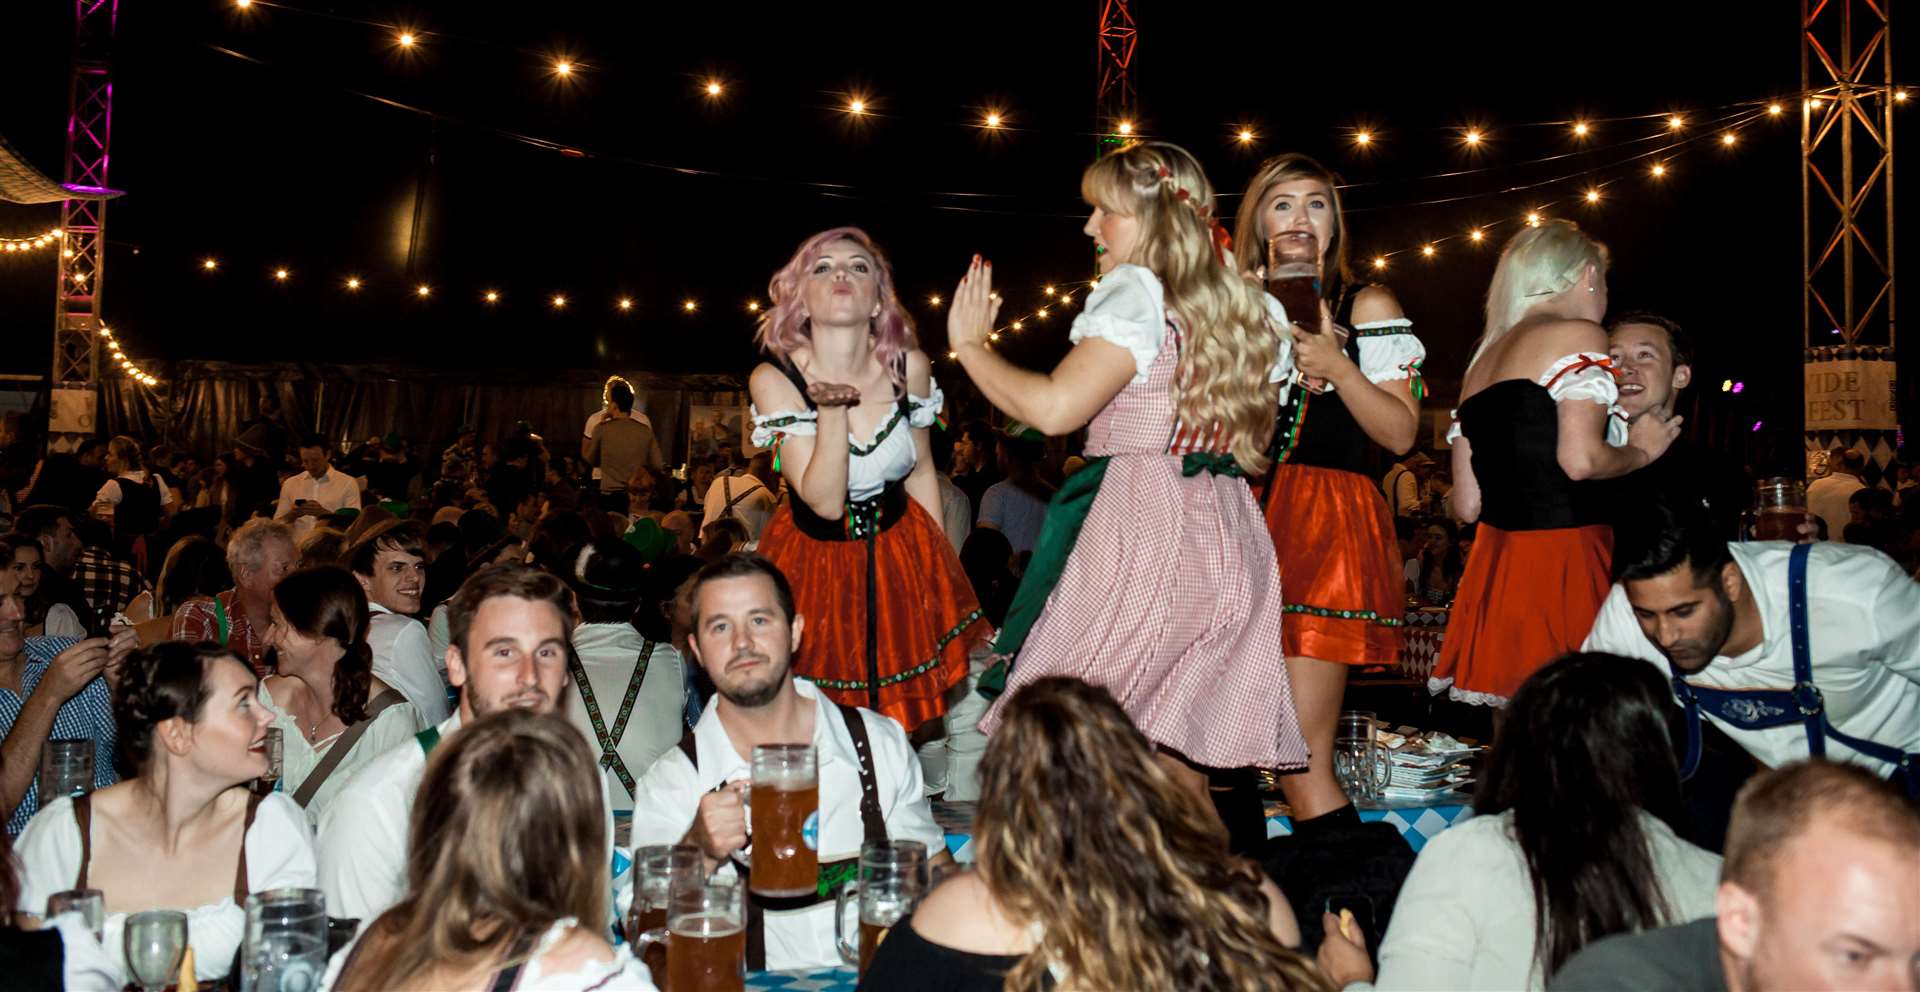 Whether you’re after a beer out with mates or some serious table dancing, you can find what's right for you at London Oktoberfest.